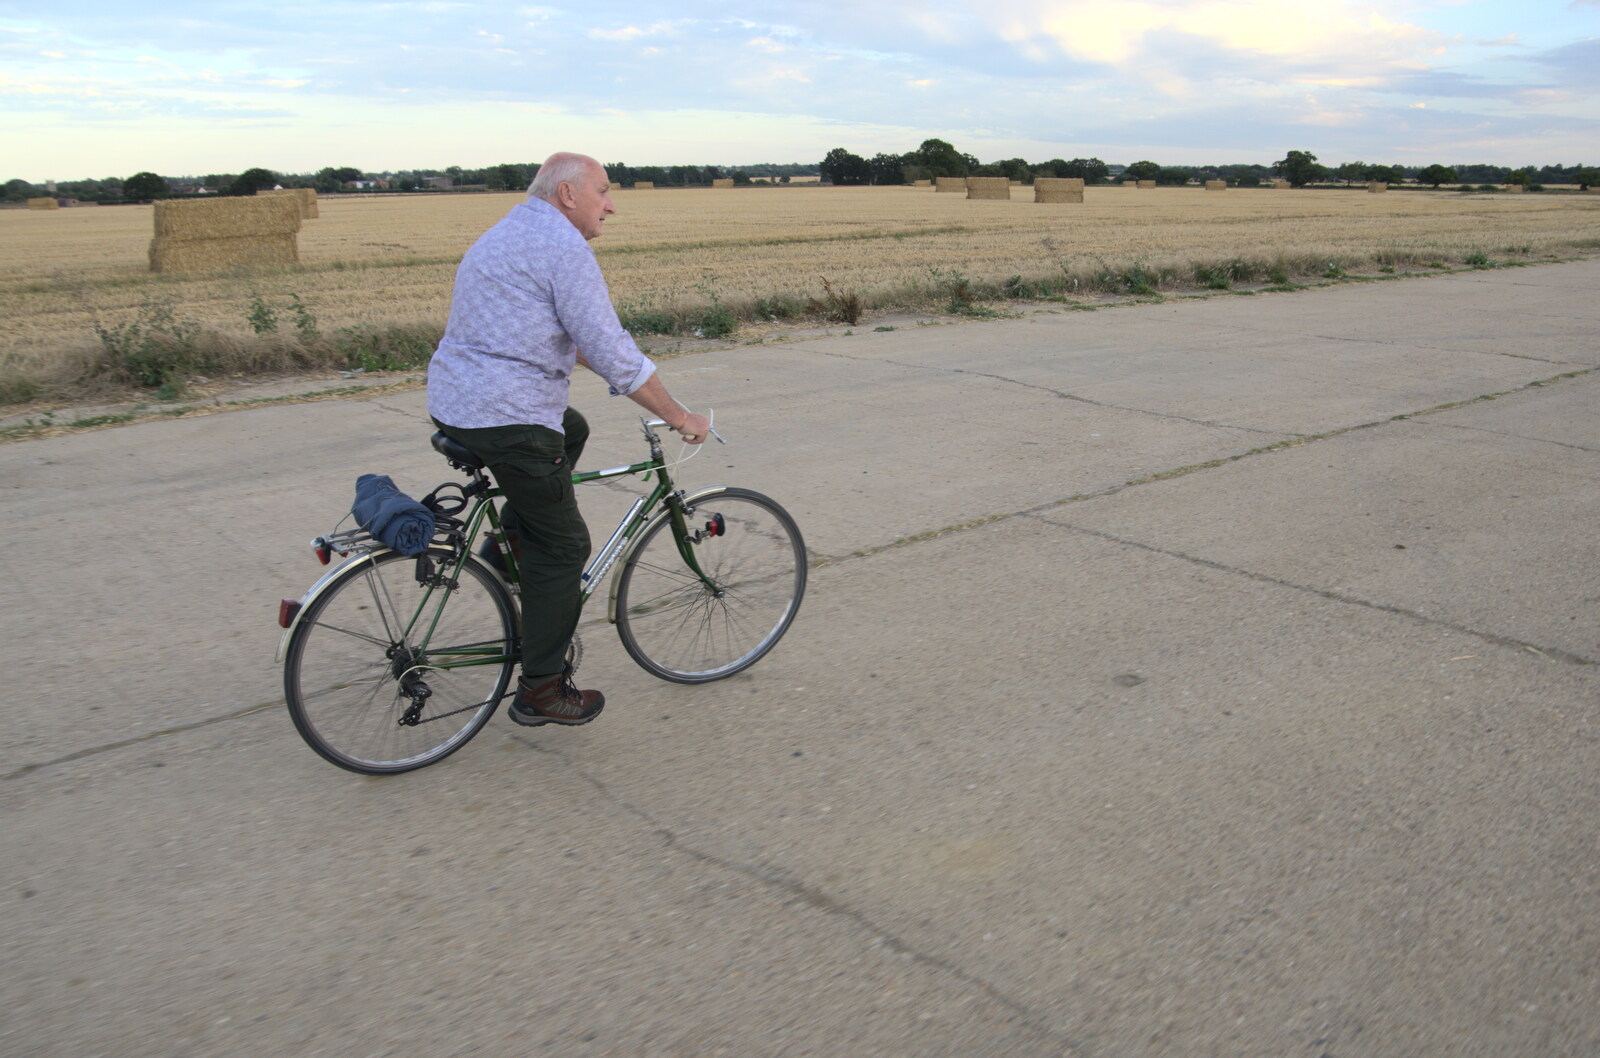 Mick cycles along the main runway from Eye Airfield with Mick the Brick, Eye, Suffolk - 5th August 2020